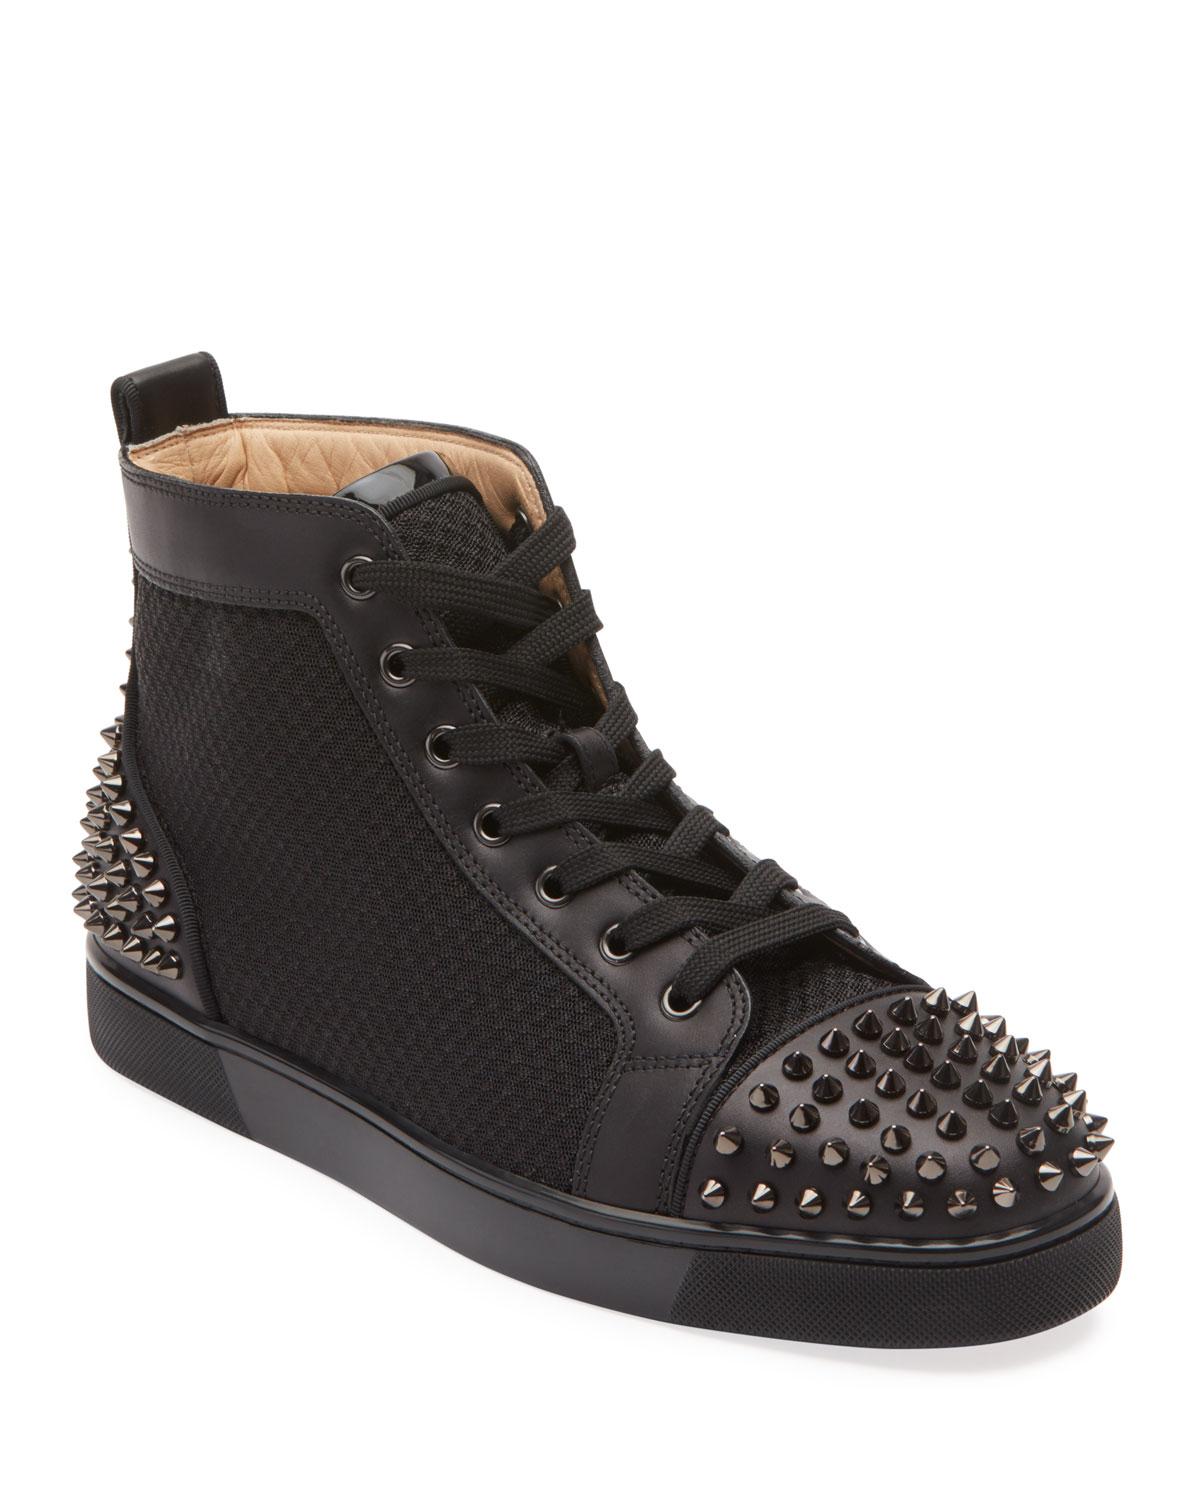 Christian Louboutin Men's Lou Spiked Leather High-top Sneakers in Black ...